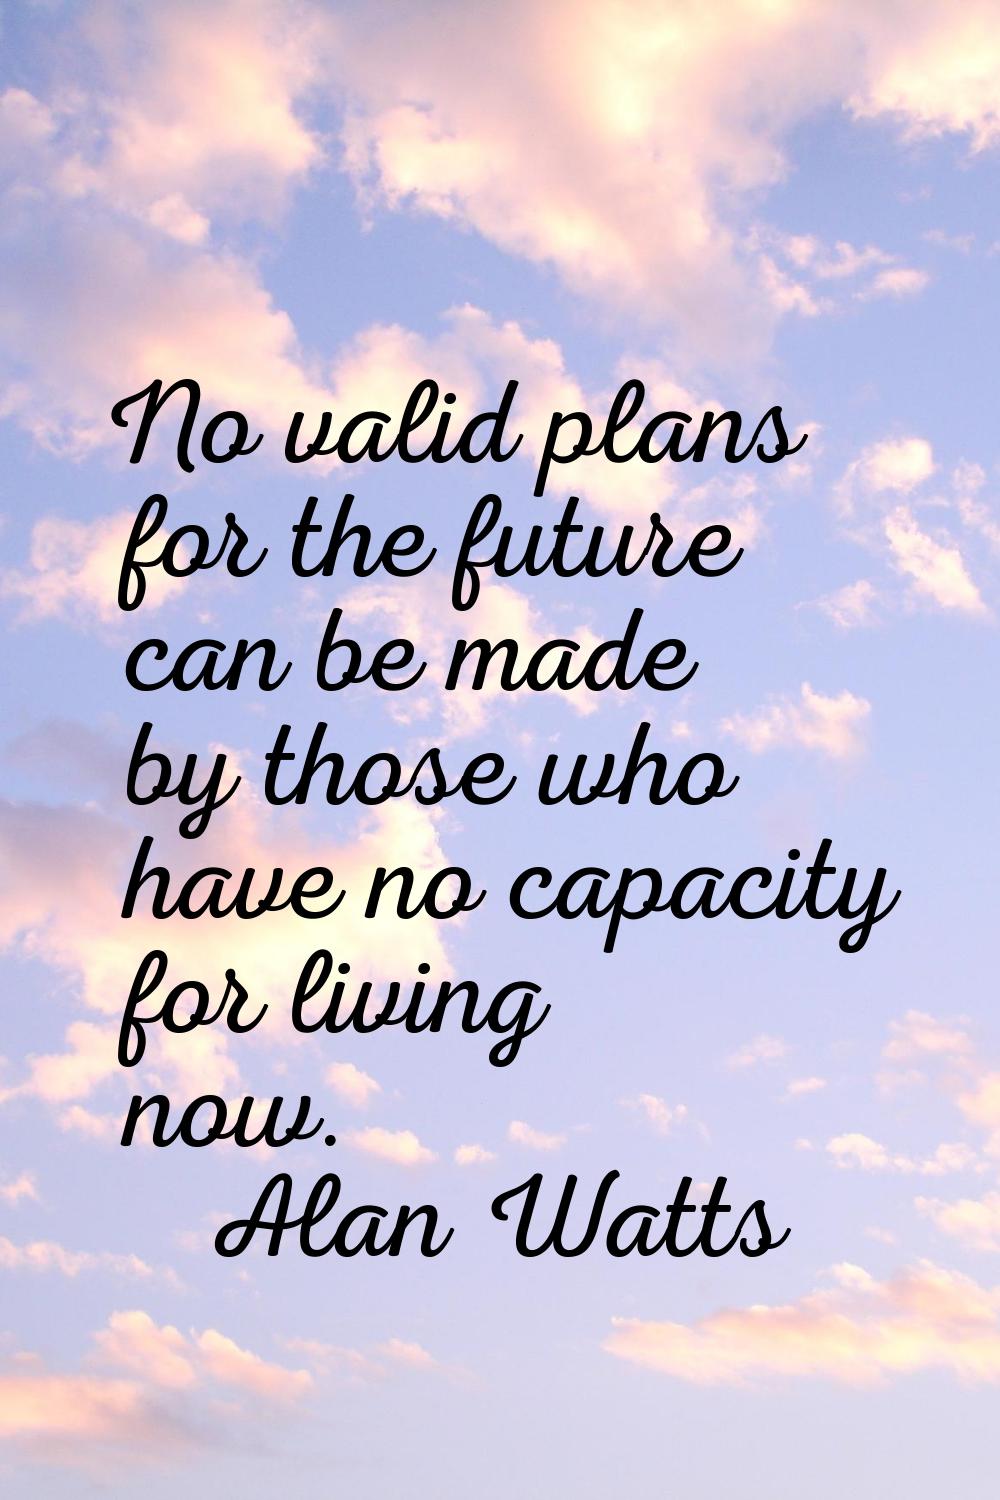 No valid plans for the future can be made by those who have no capacity for living now.